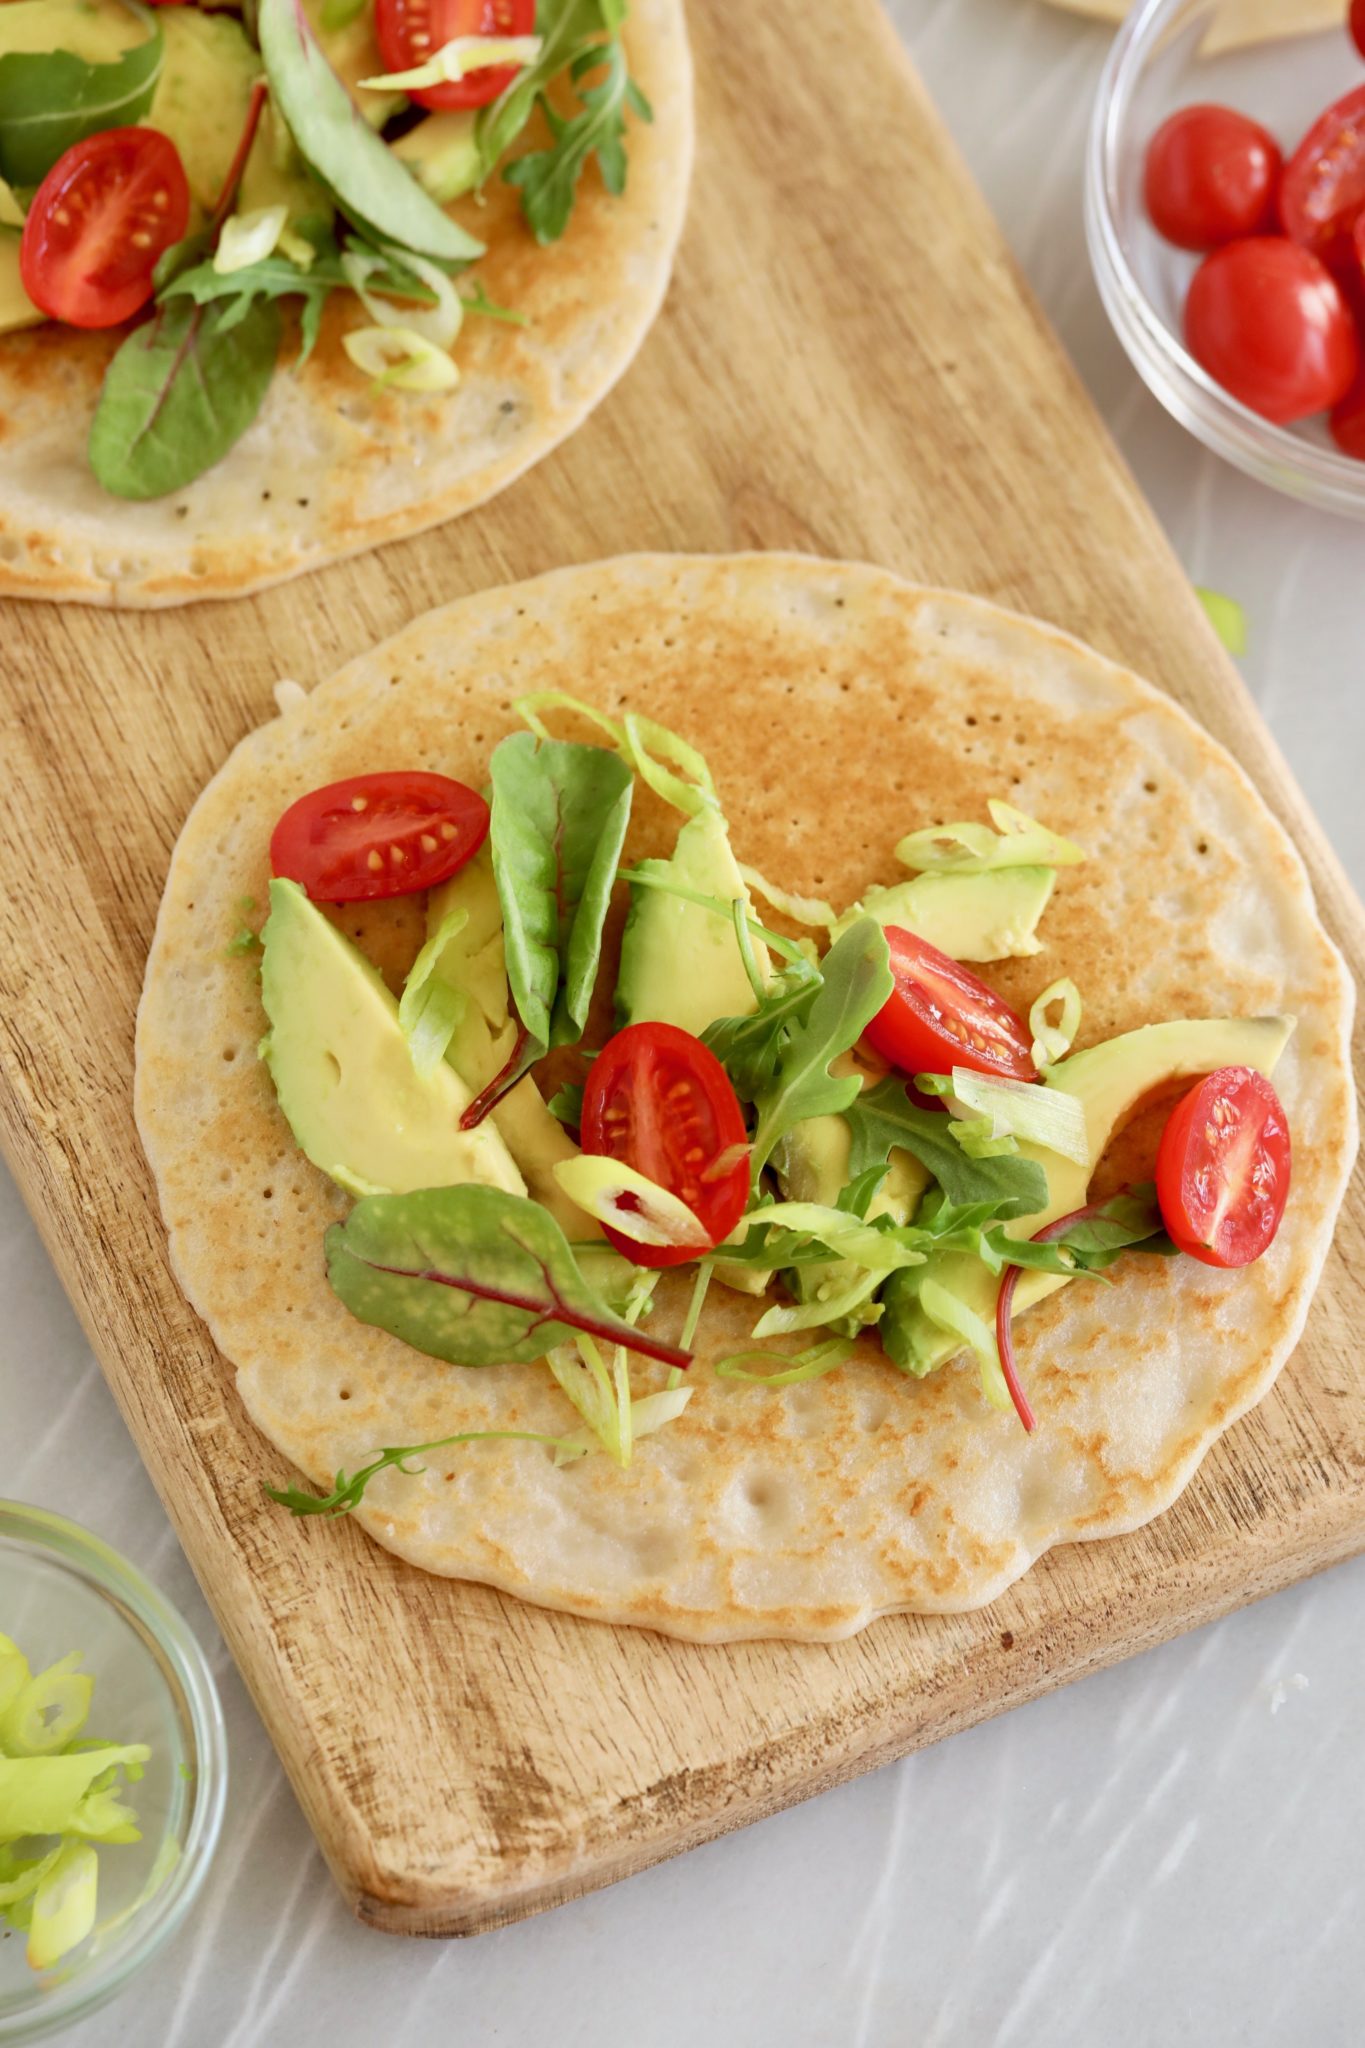 Two gluten-free flatbreads topped with veggies and avocado.